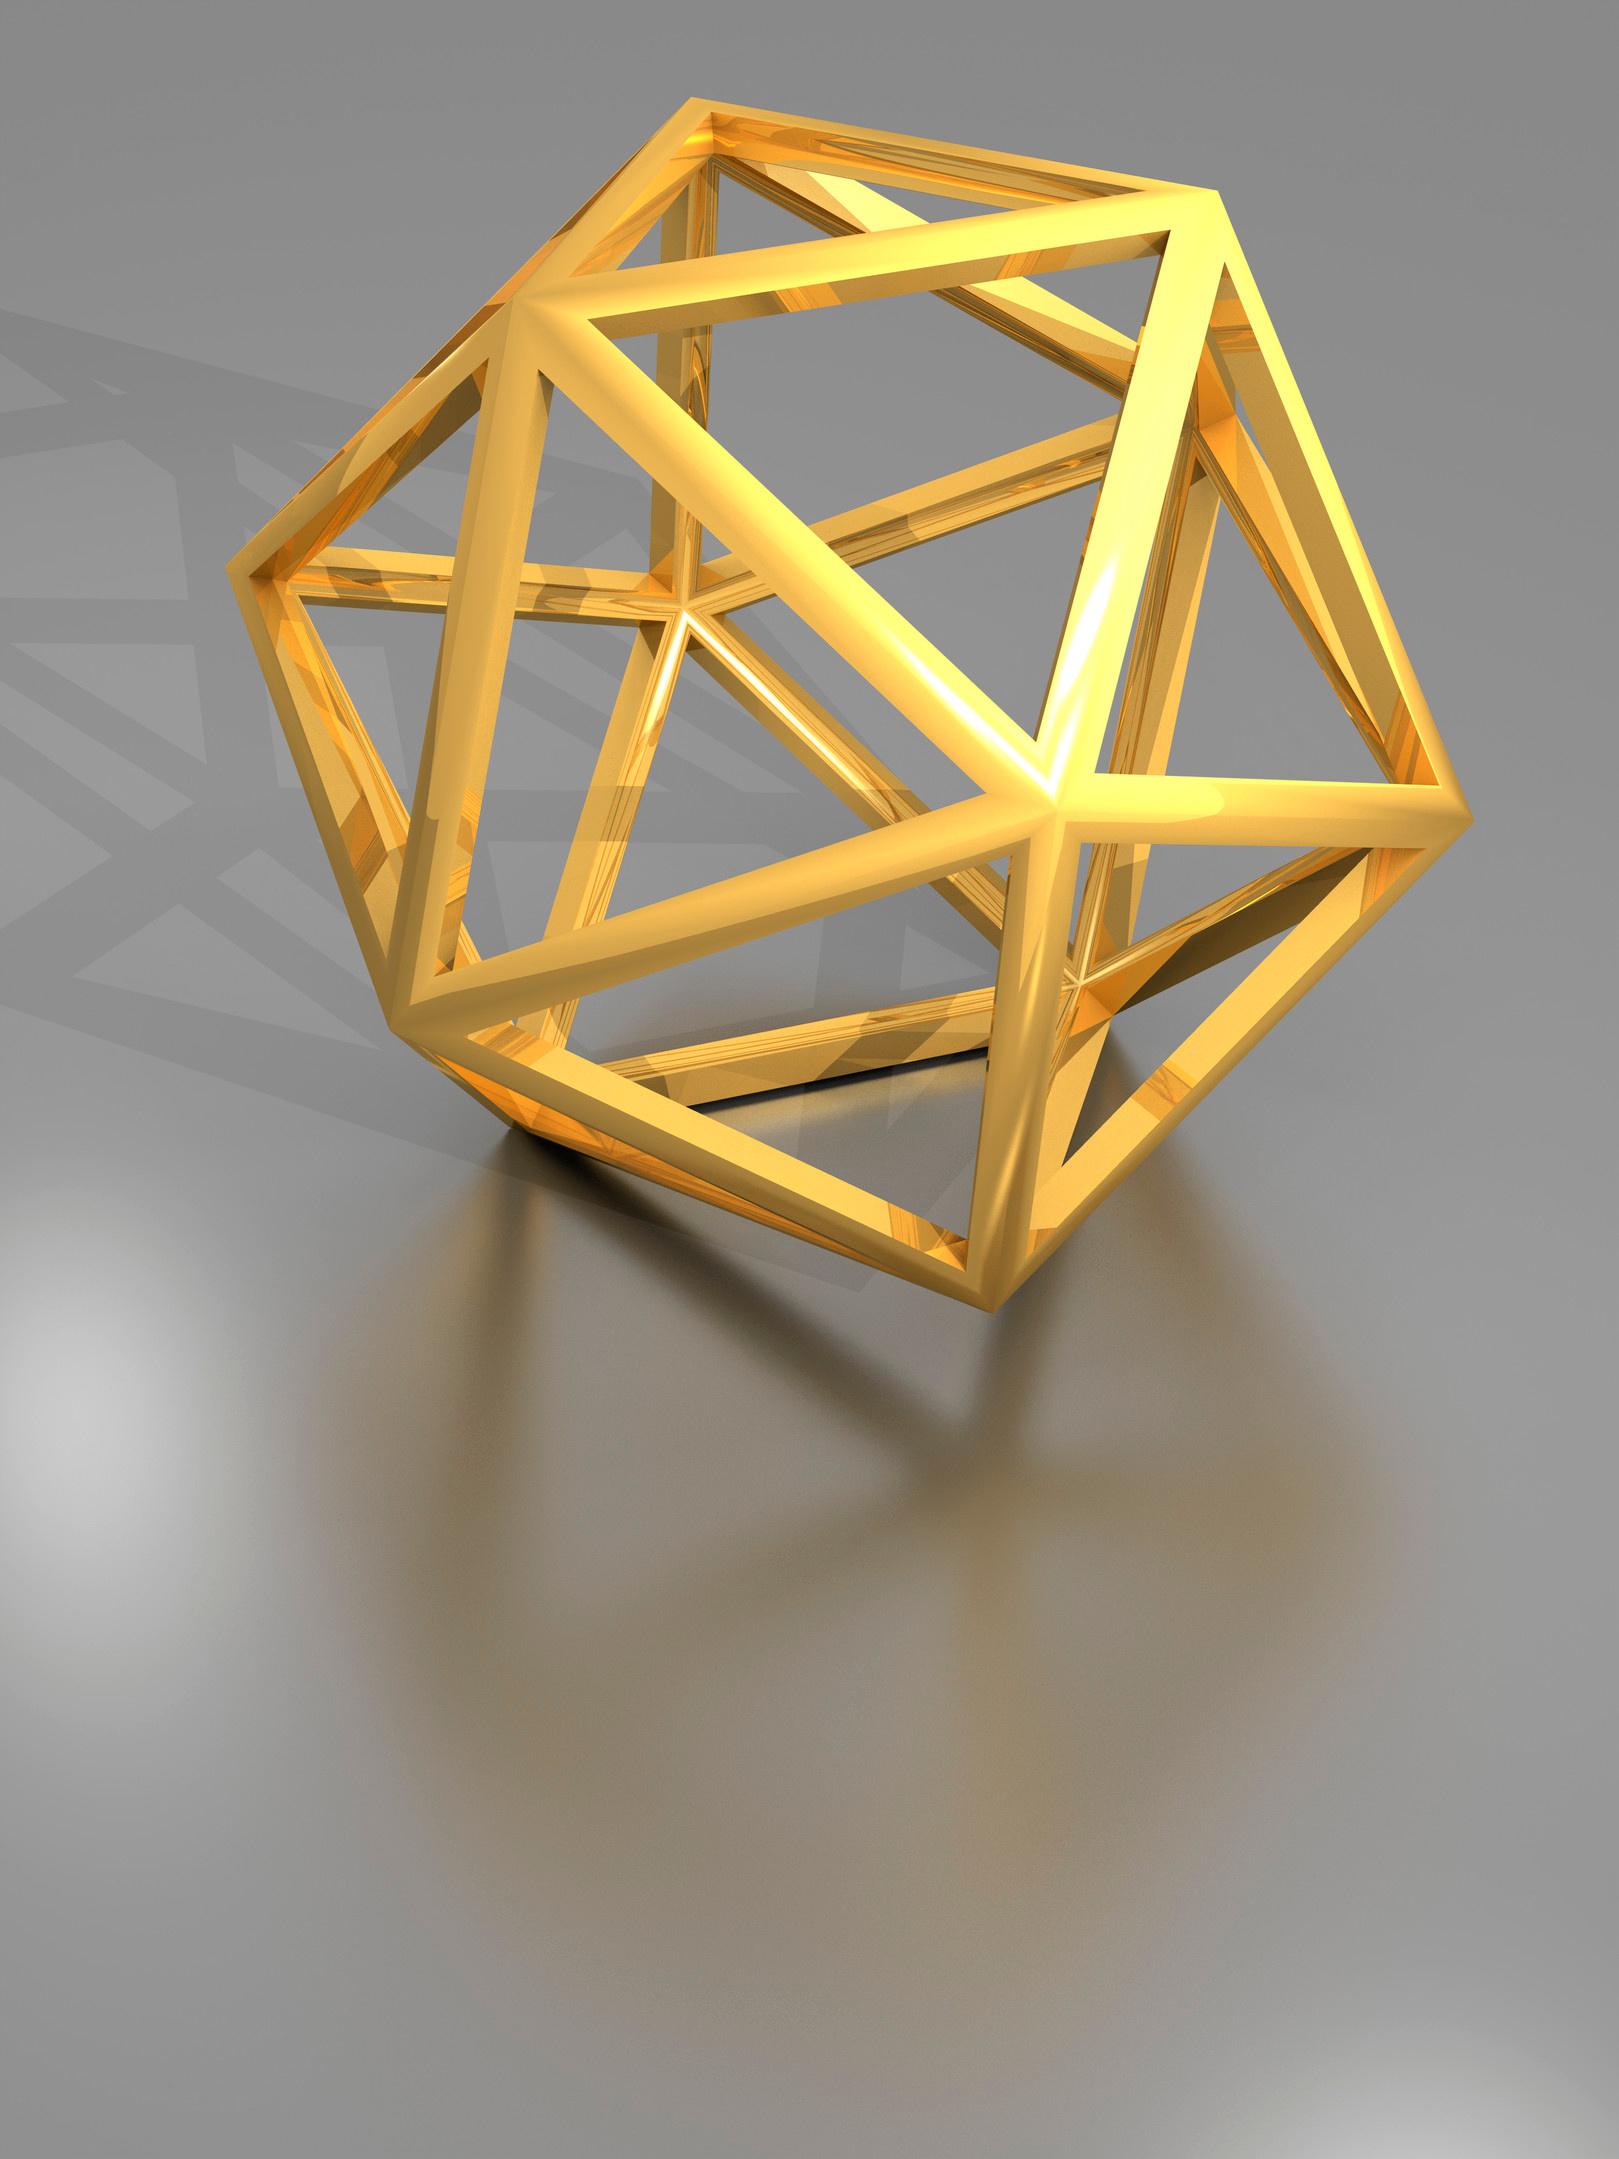 "Icosahedral structure